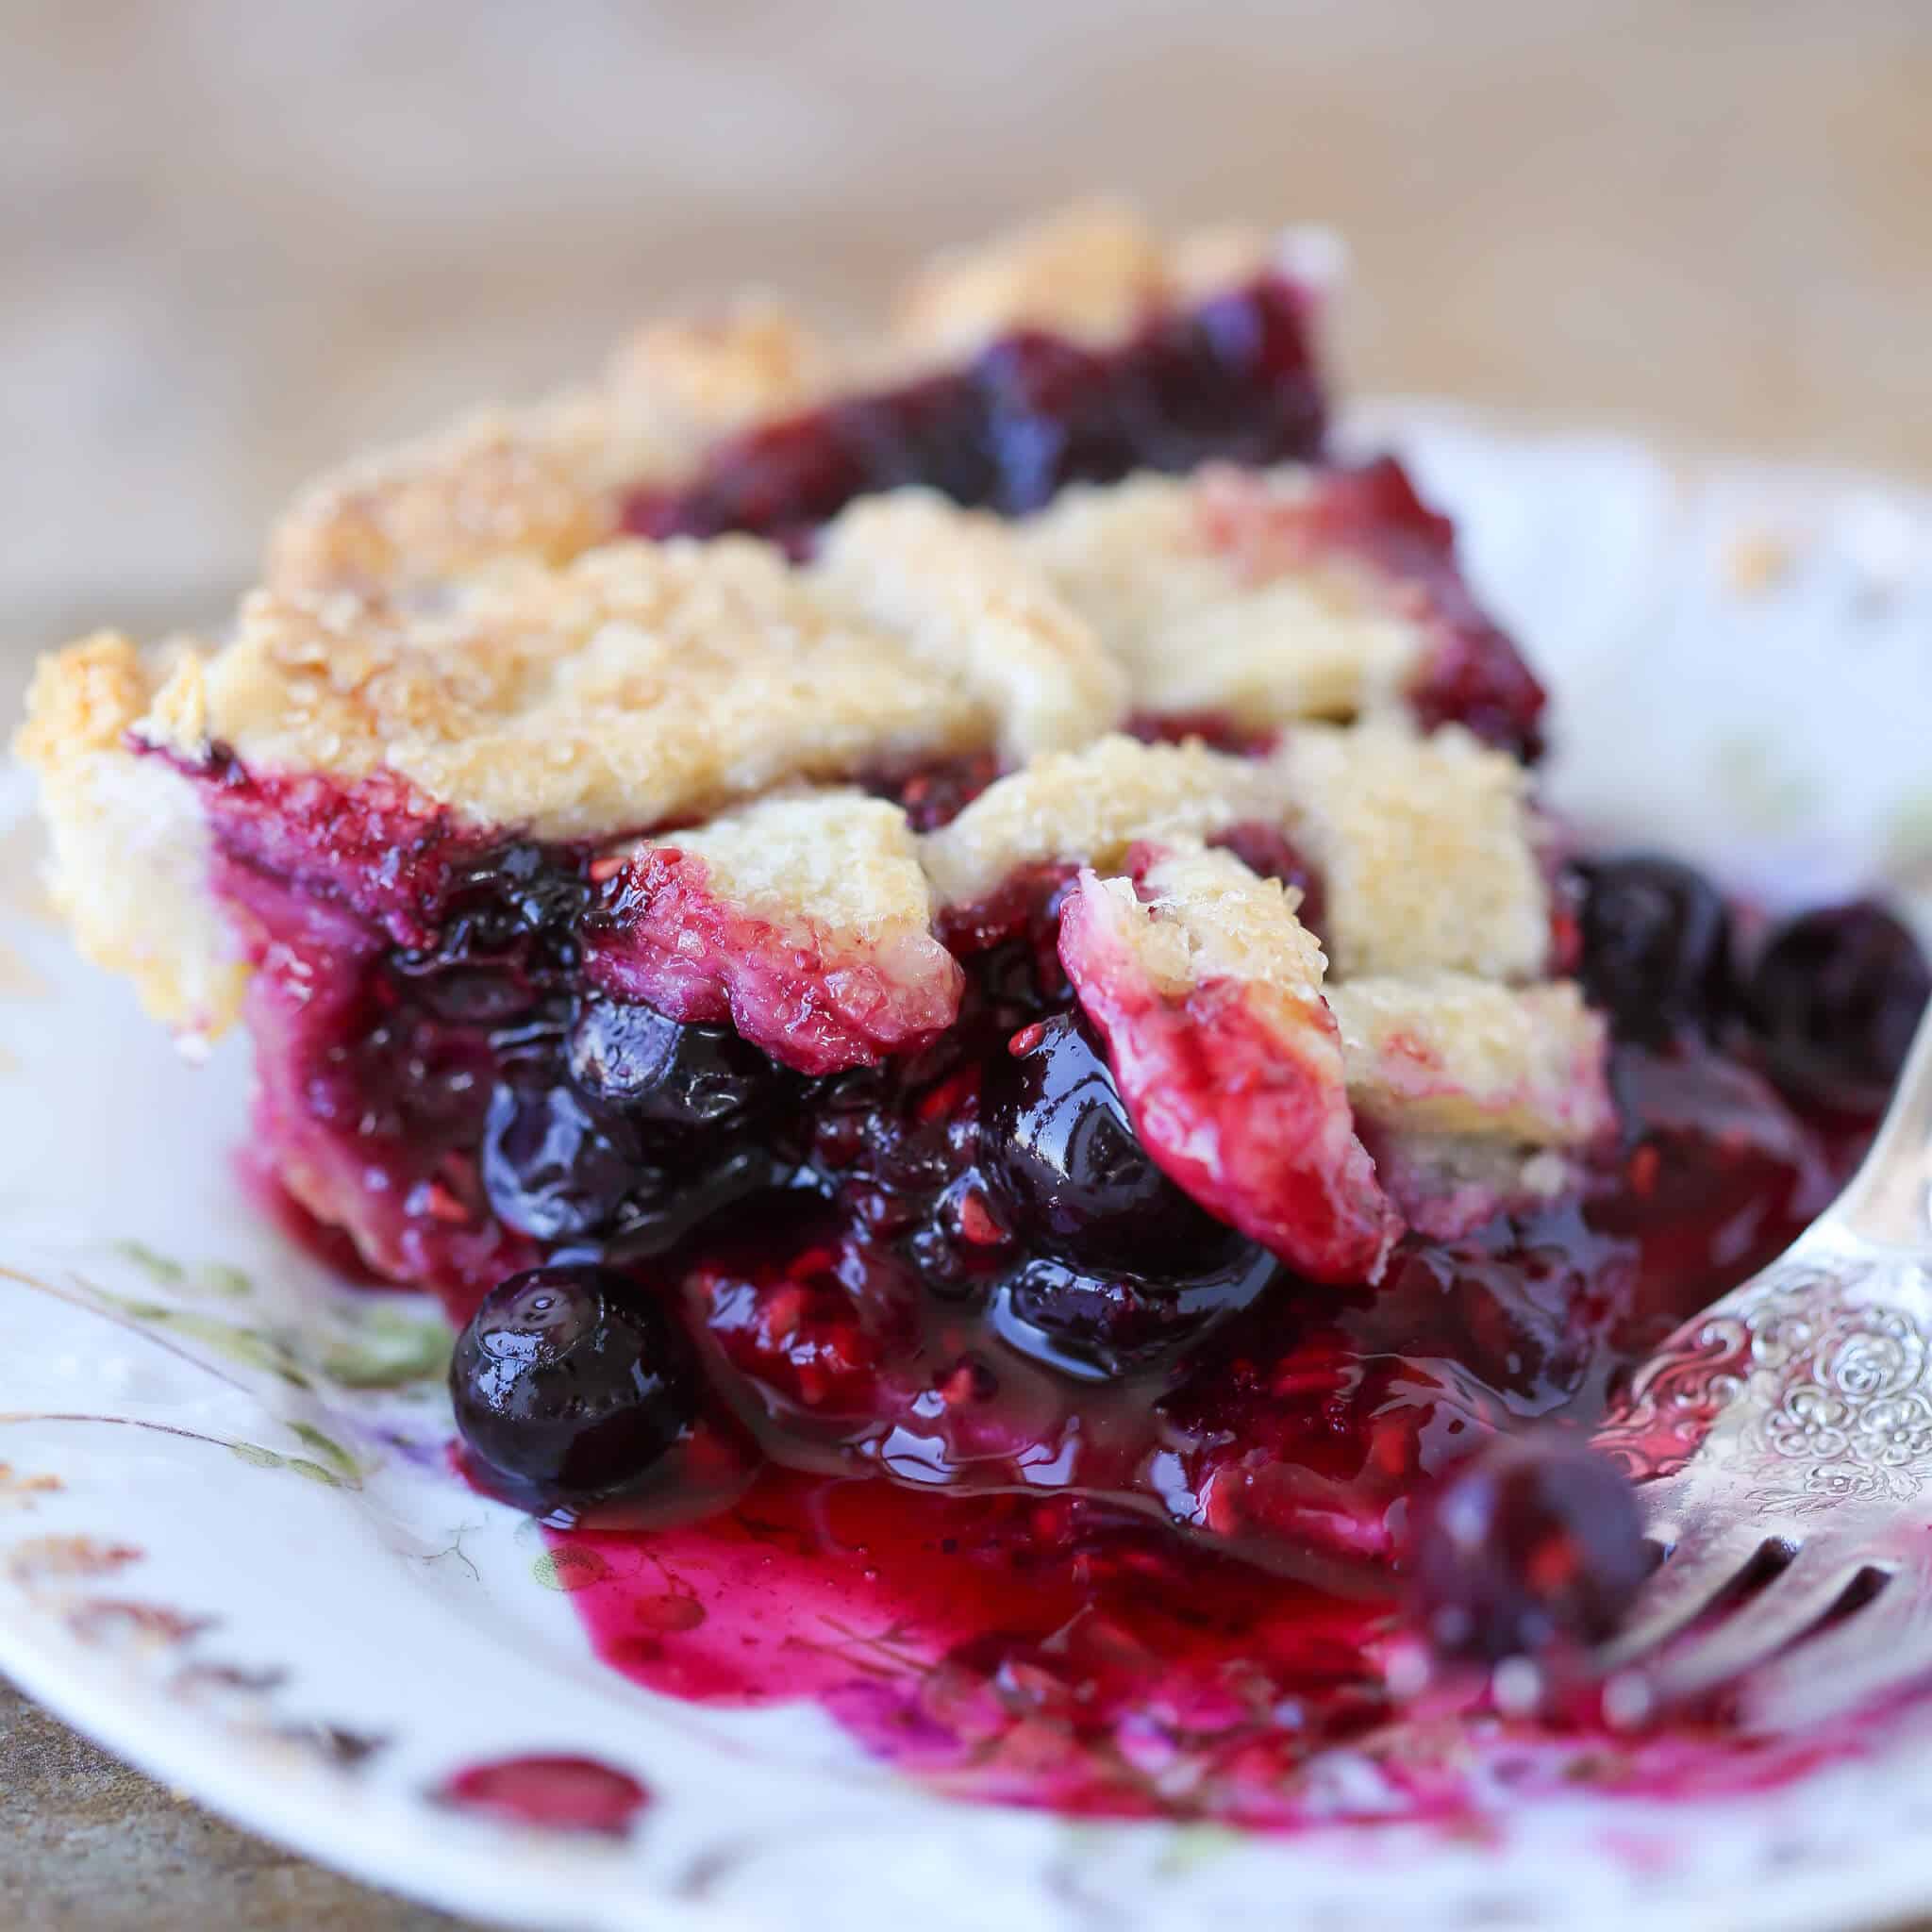 A slice of mixed berry pie on white antique plate.